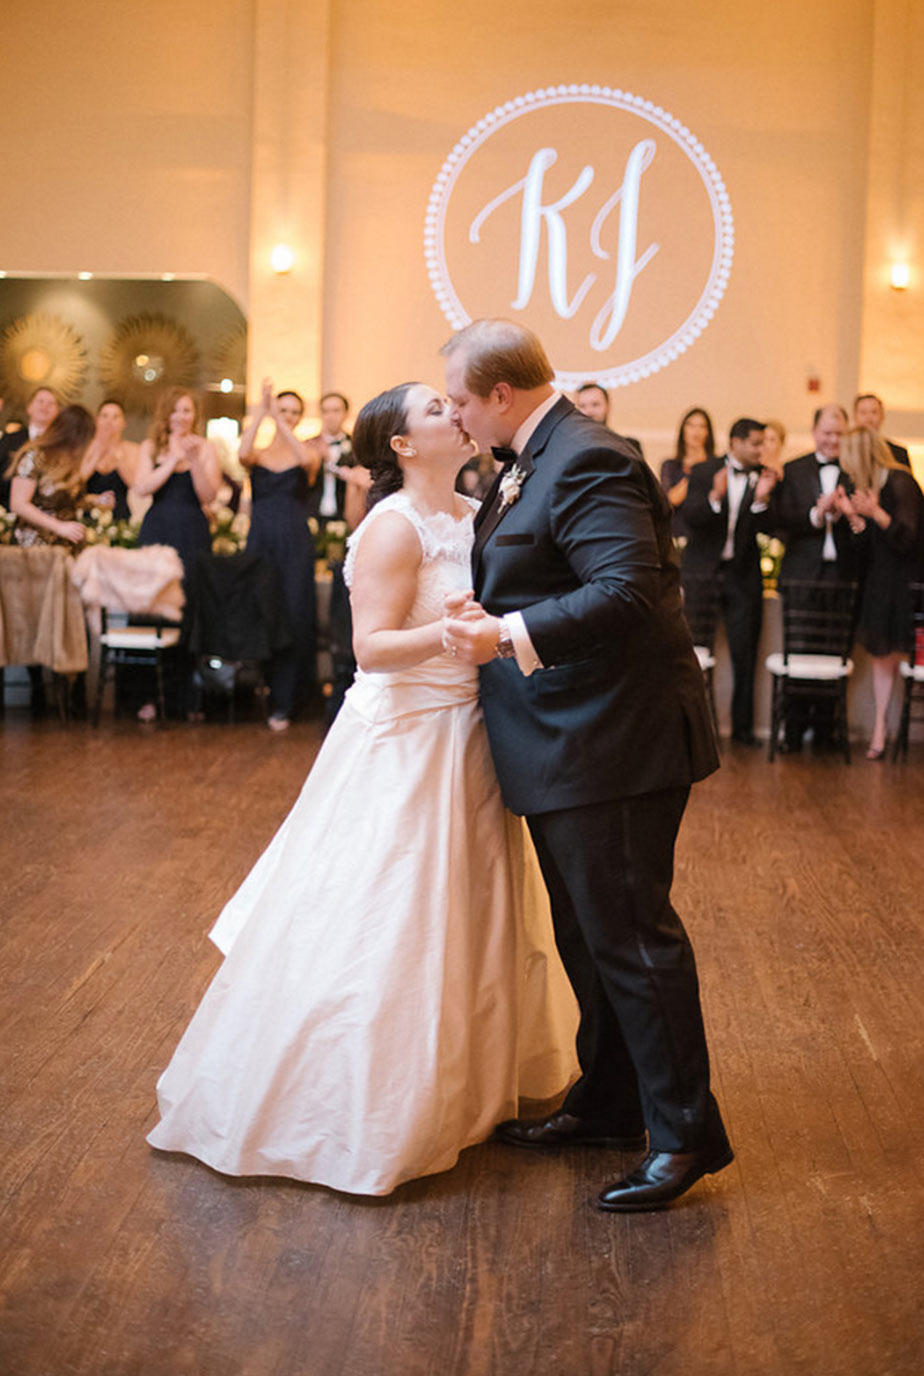 Bride and groom first dance at The Room on Main in Dallas with white gobo monogram